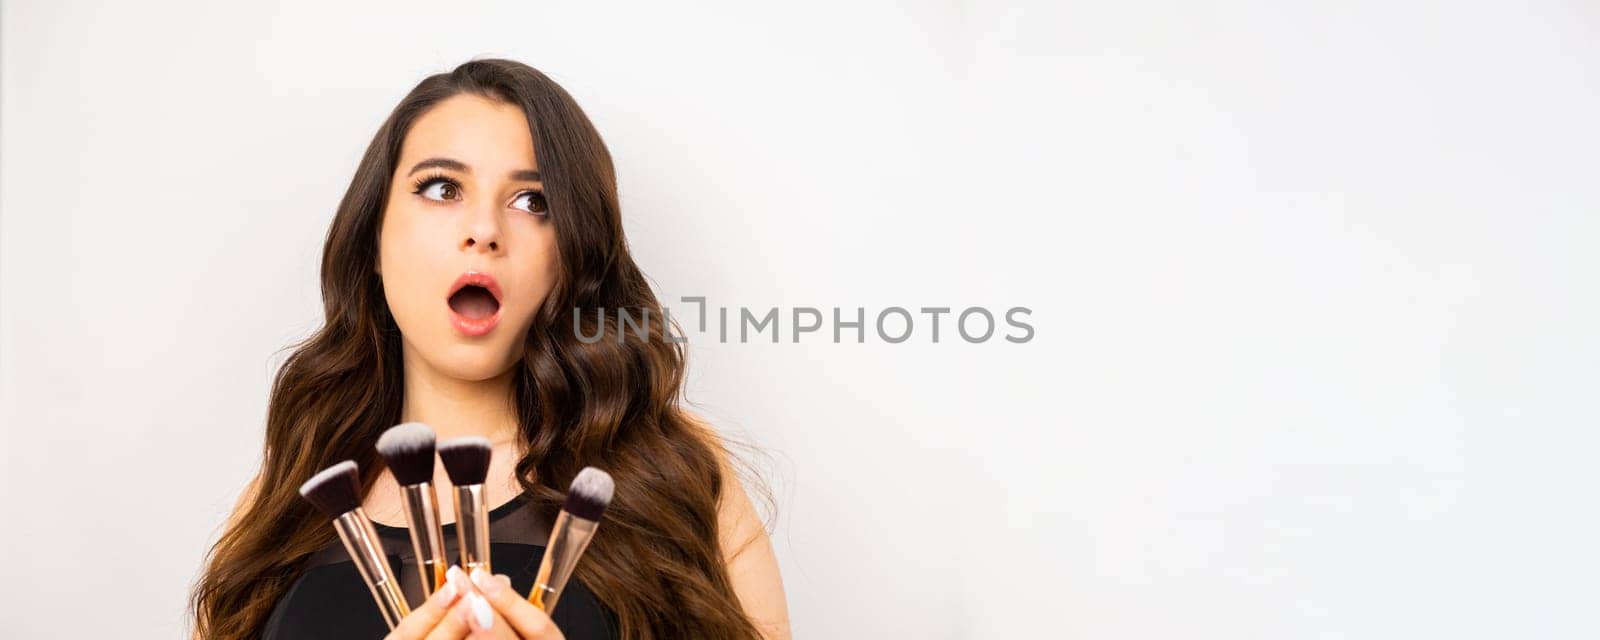 Banner with attractive excited woman holding a set of makeup brushes for professional use by vladimka